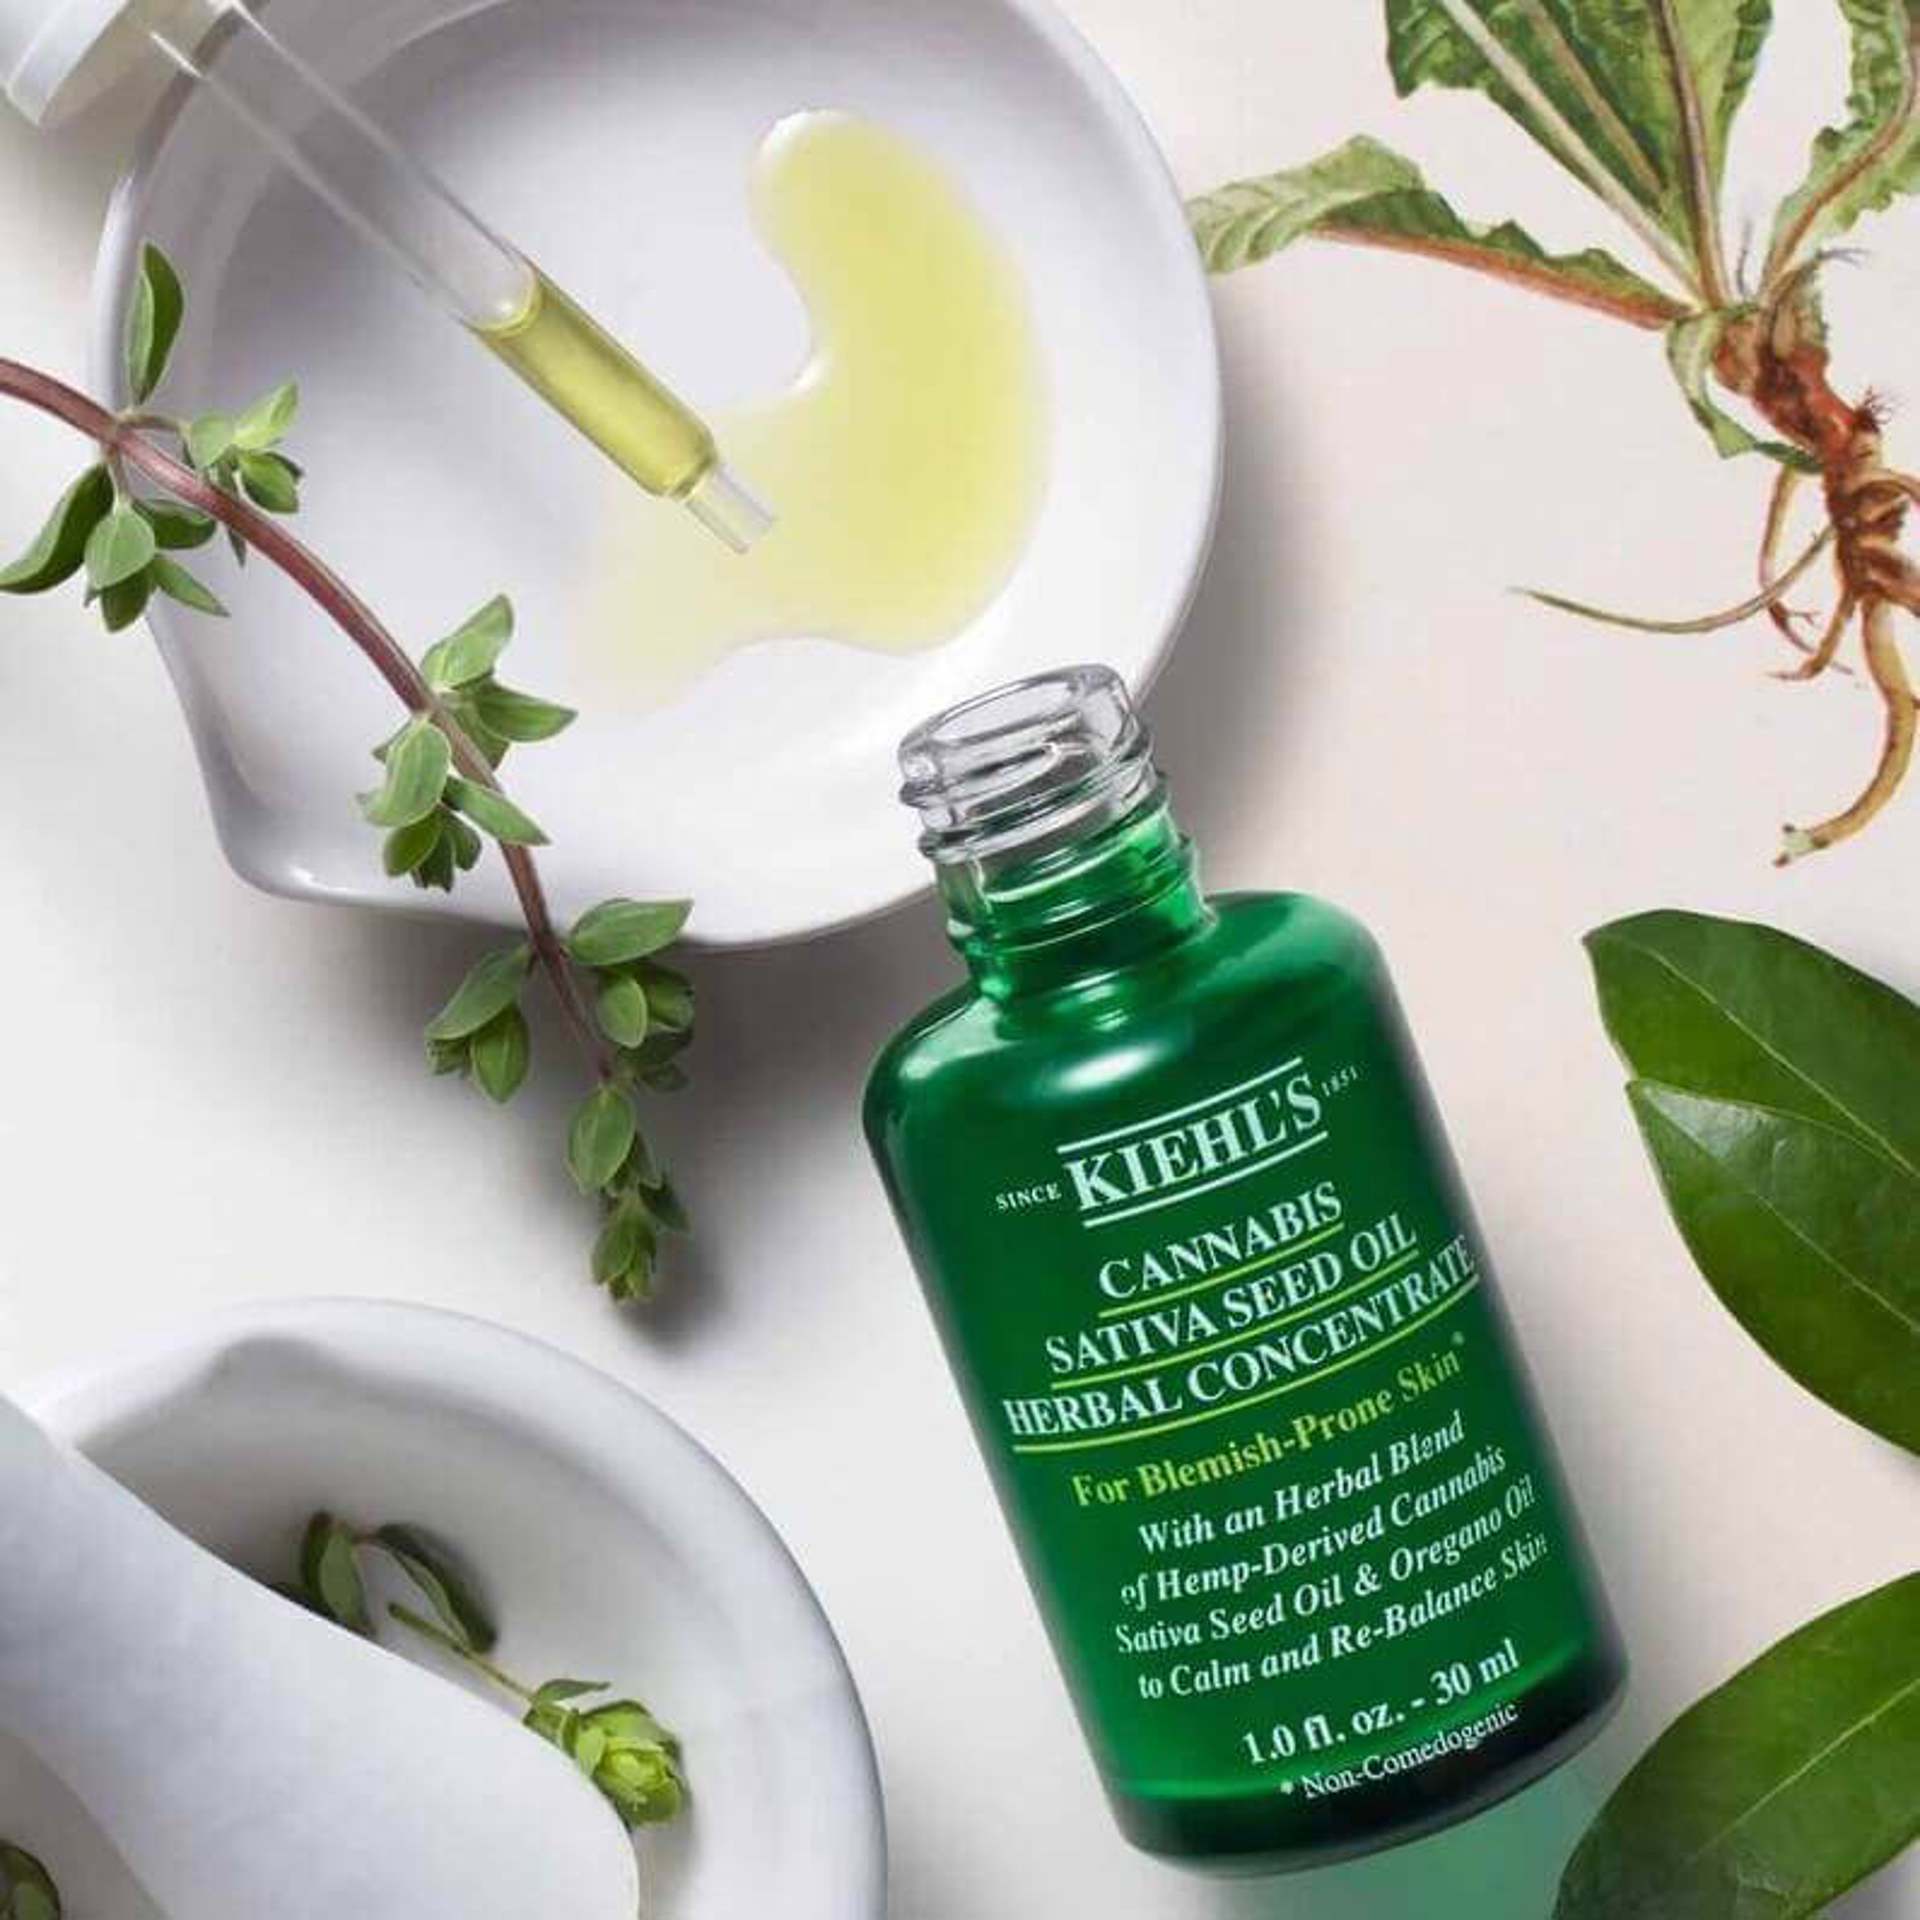 Kiehl’s Cannabis Sativa Seed Oil Herbal Concentrate